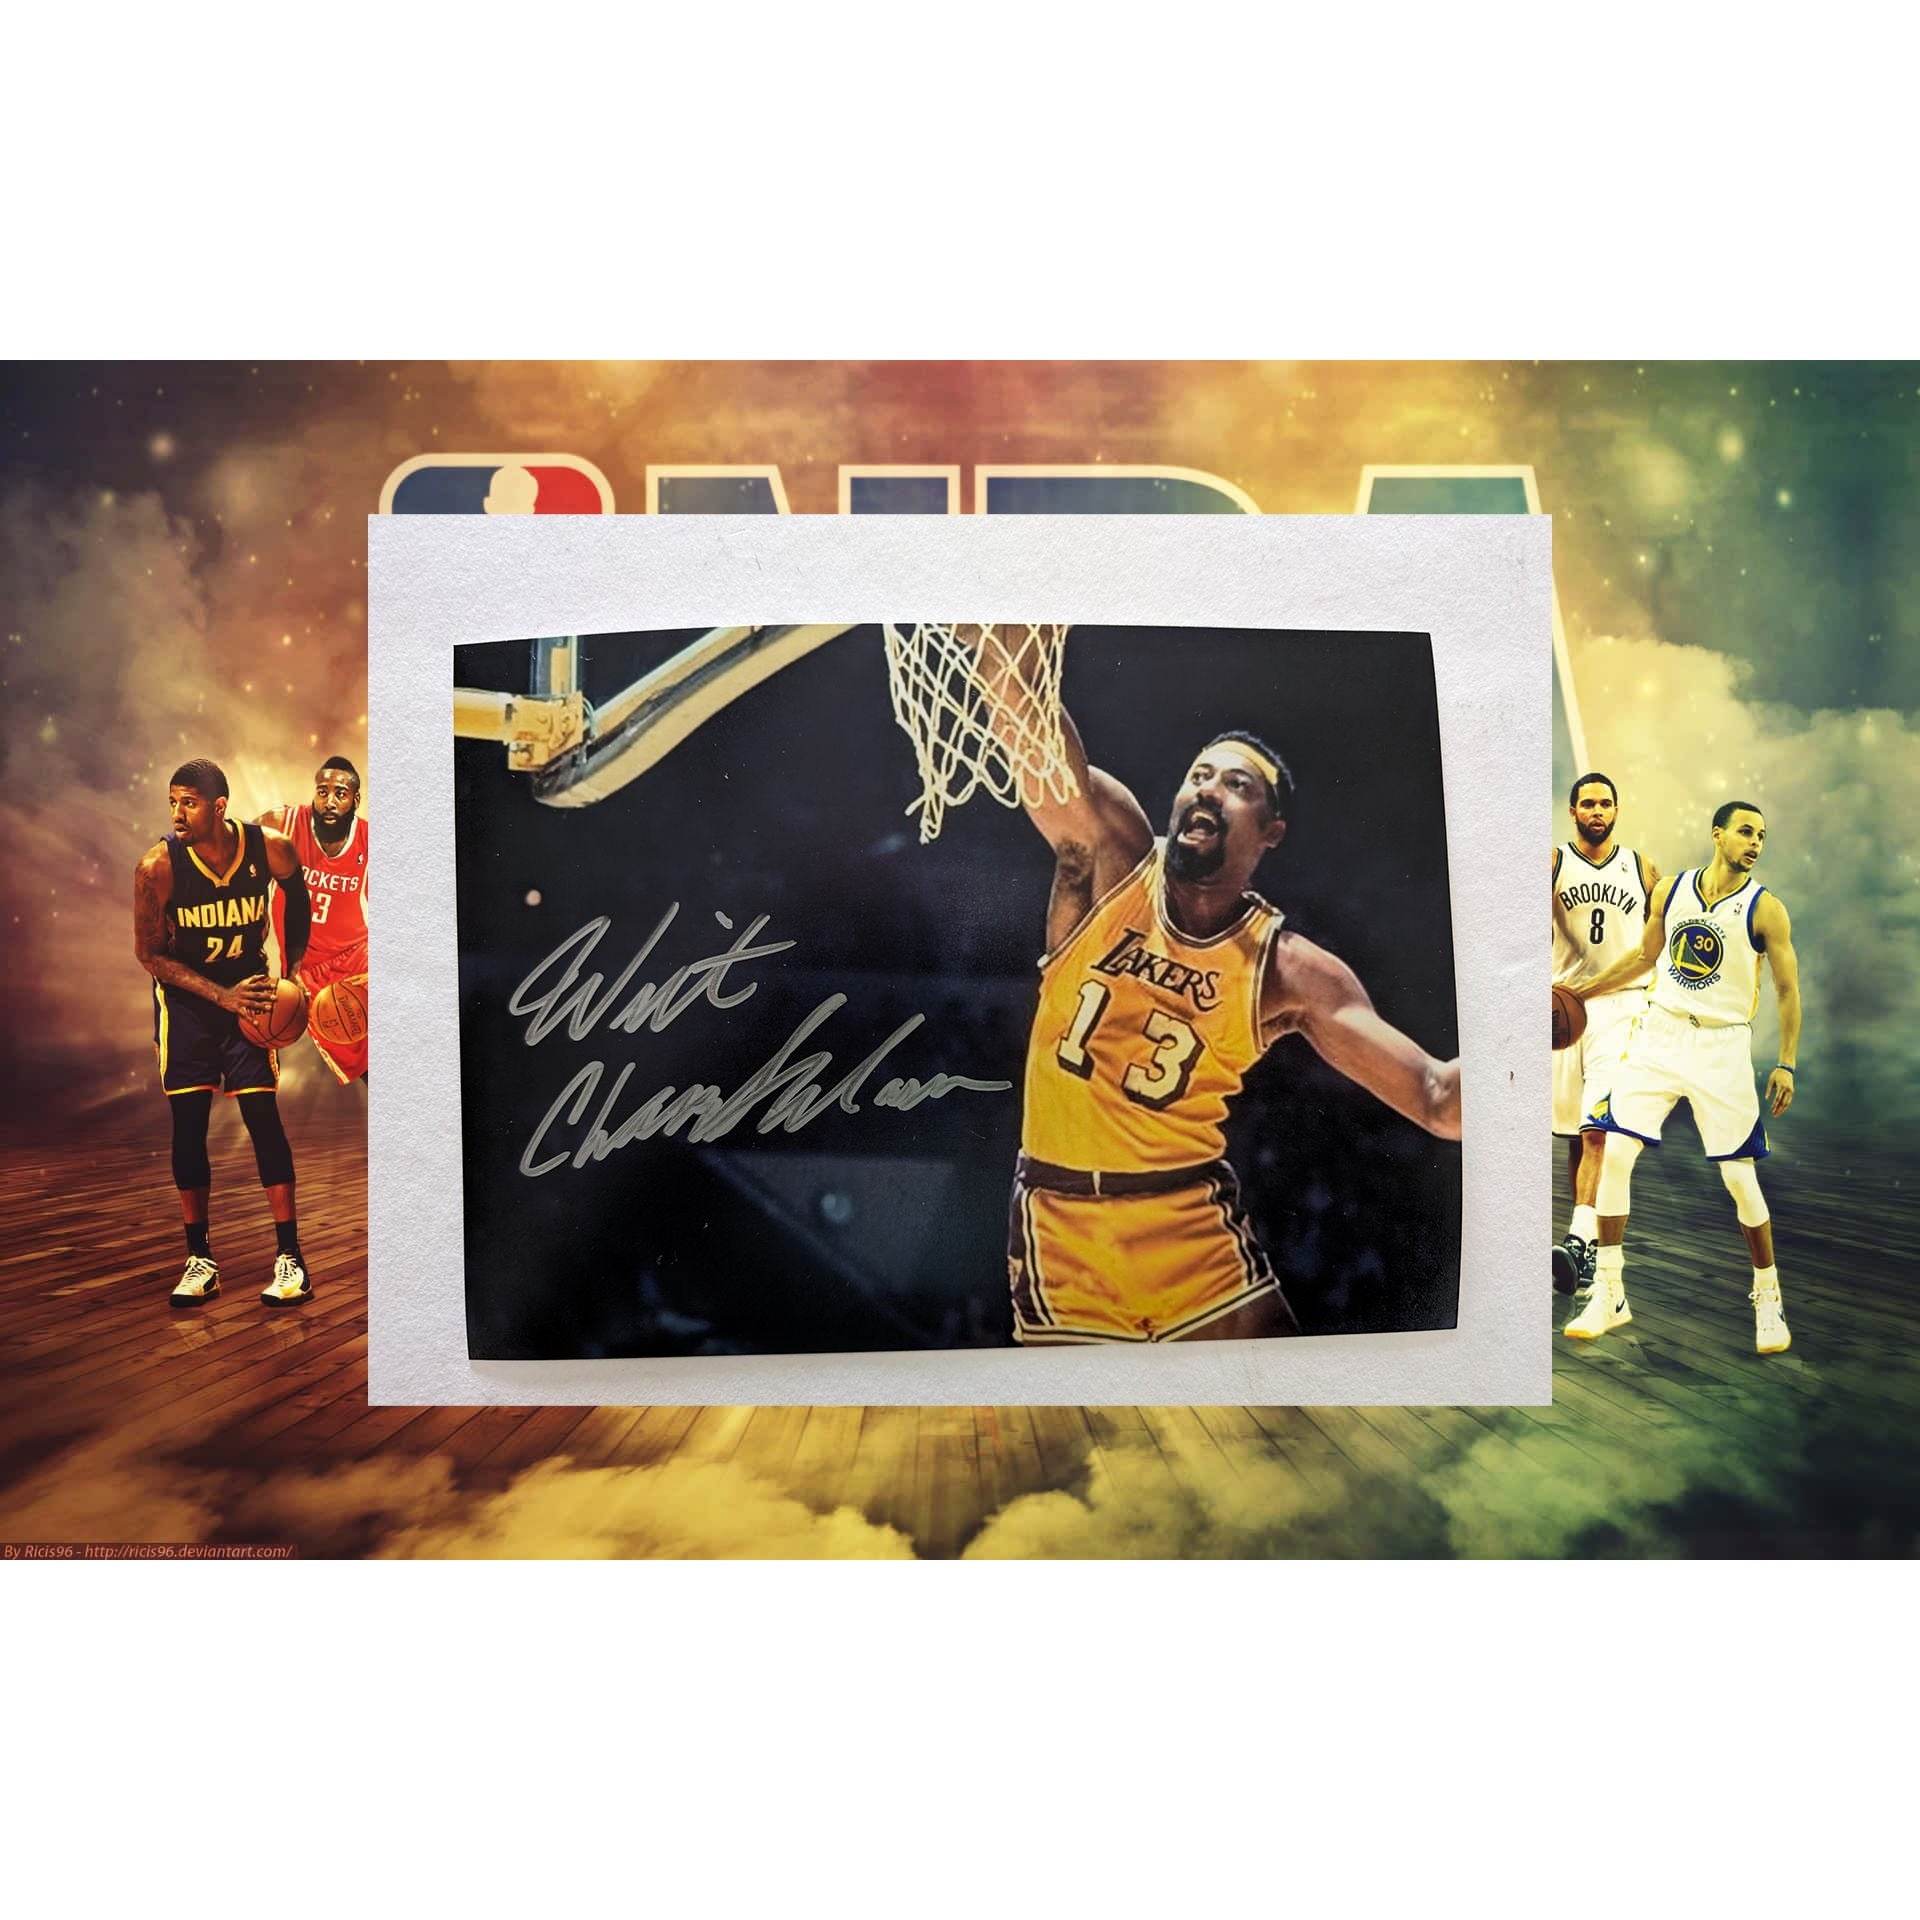 Wilt Chamberlain 5 x 7 Los Angeles Lakers photo signed